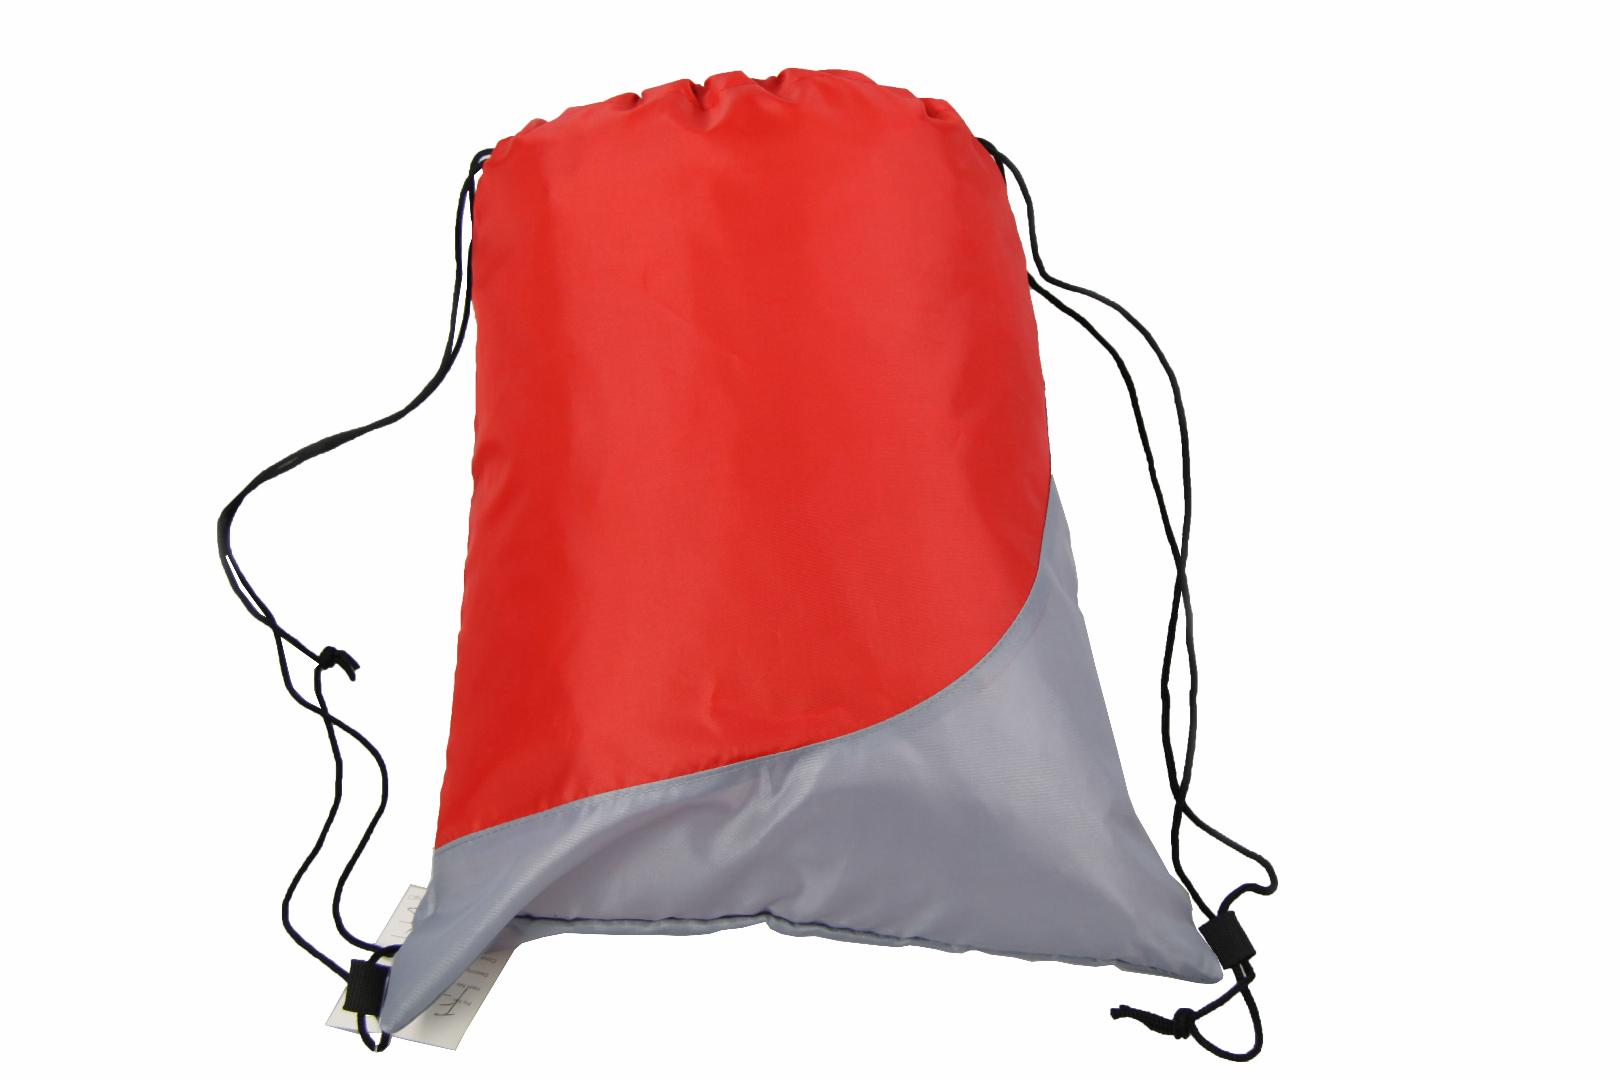 Whloesale drawstring bags backpack draw string bag